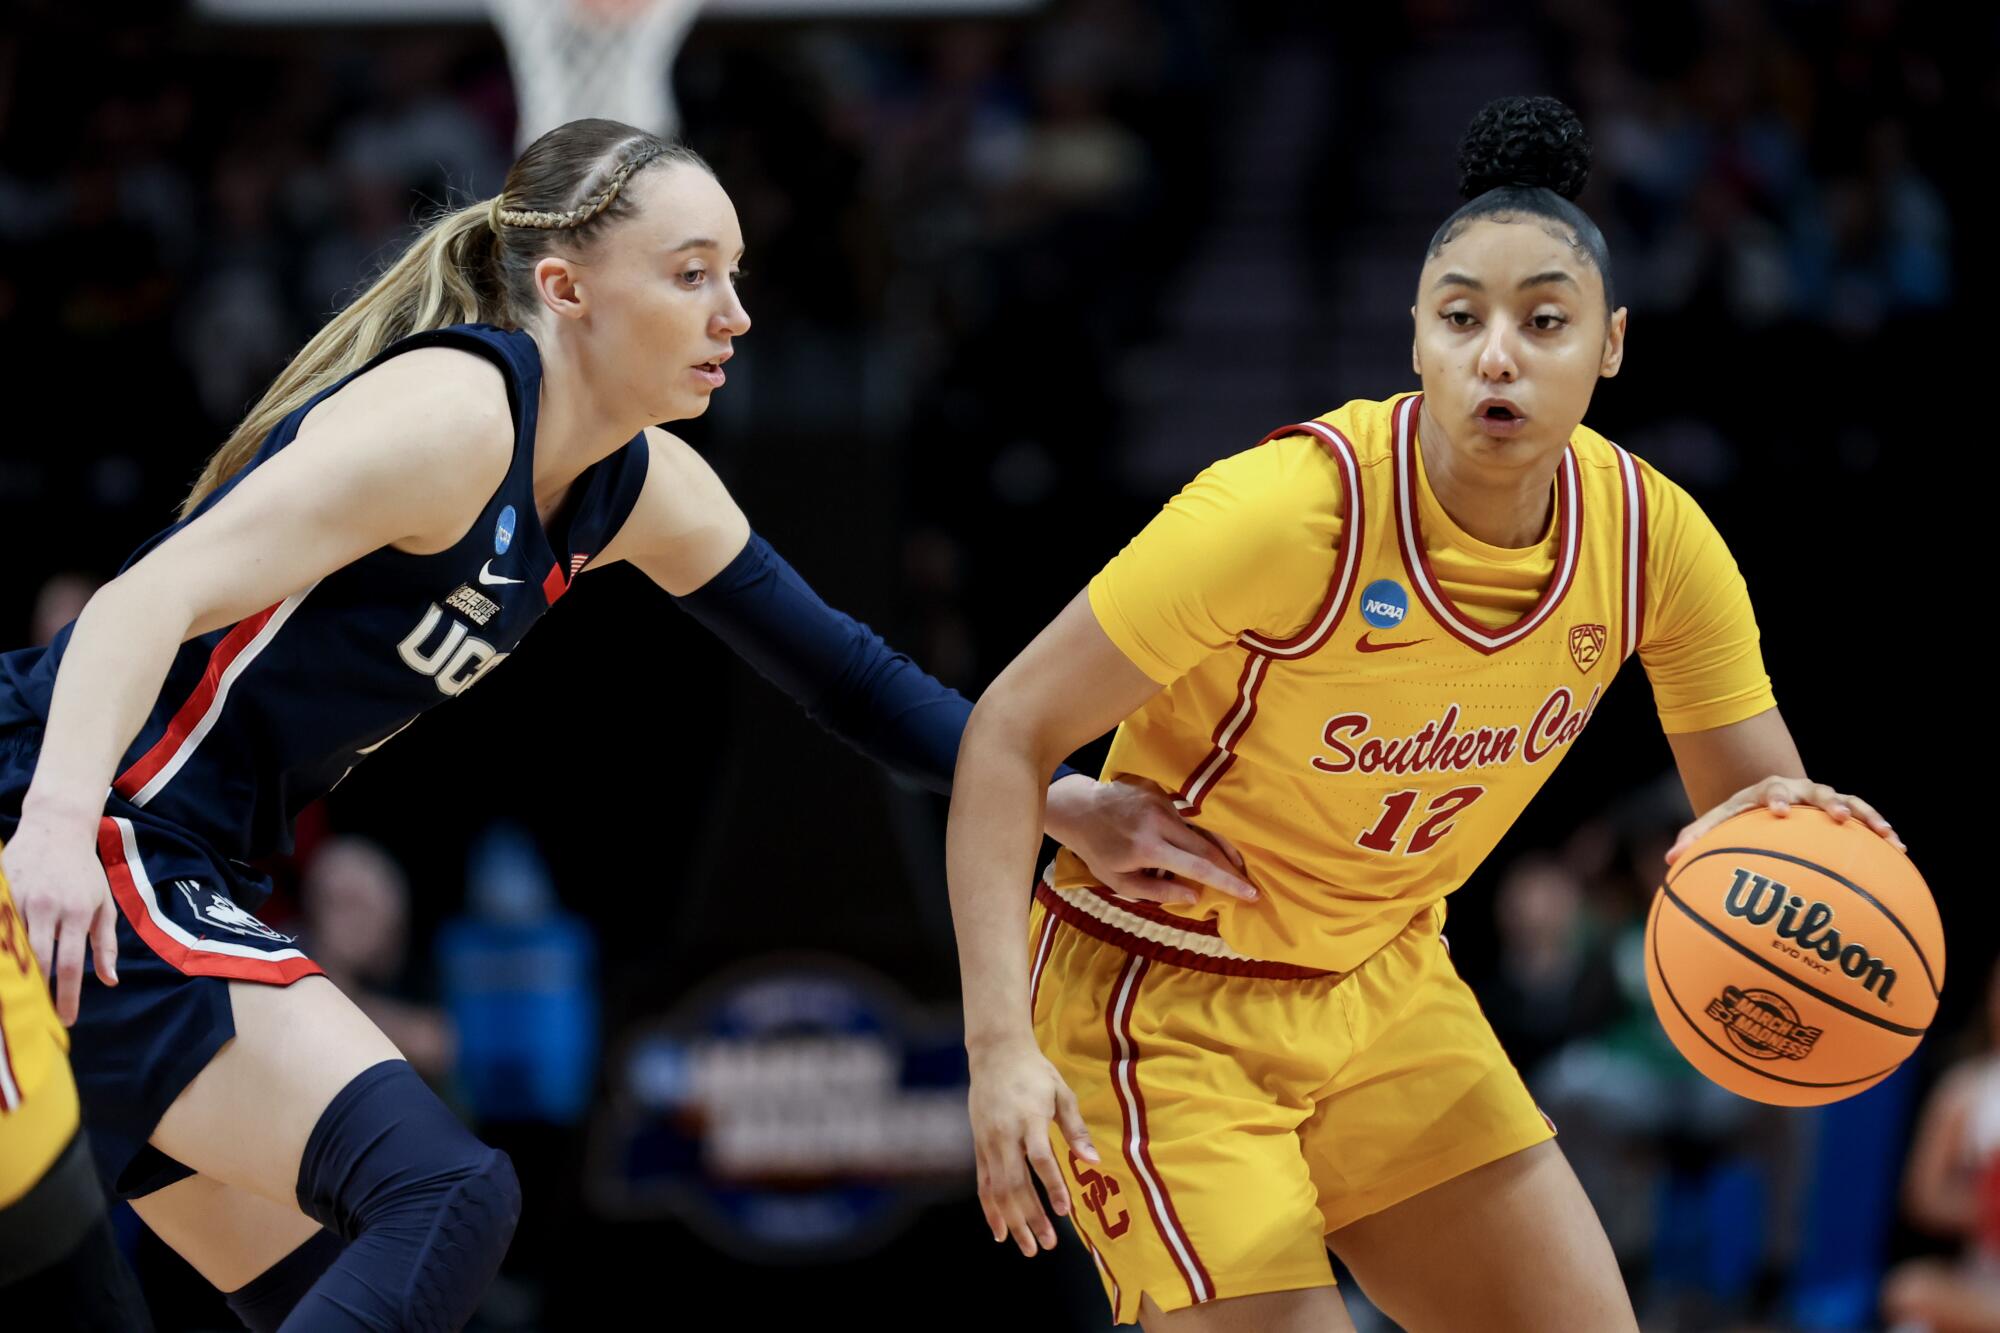 USC's JuJu Watkins controls the ball in front of Connecticut's Paige Bueckers.